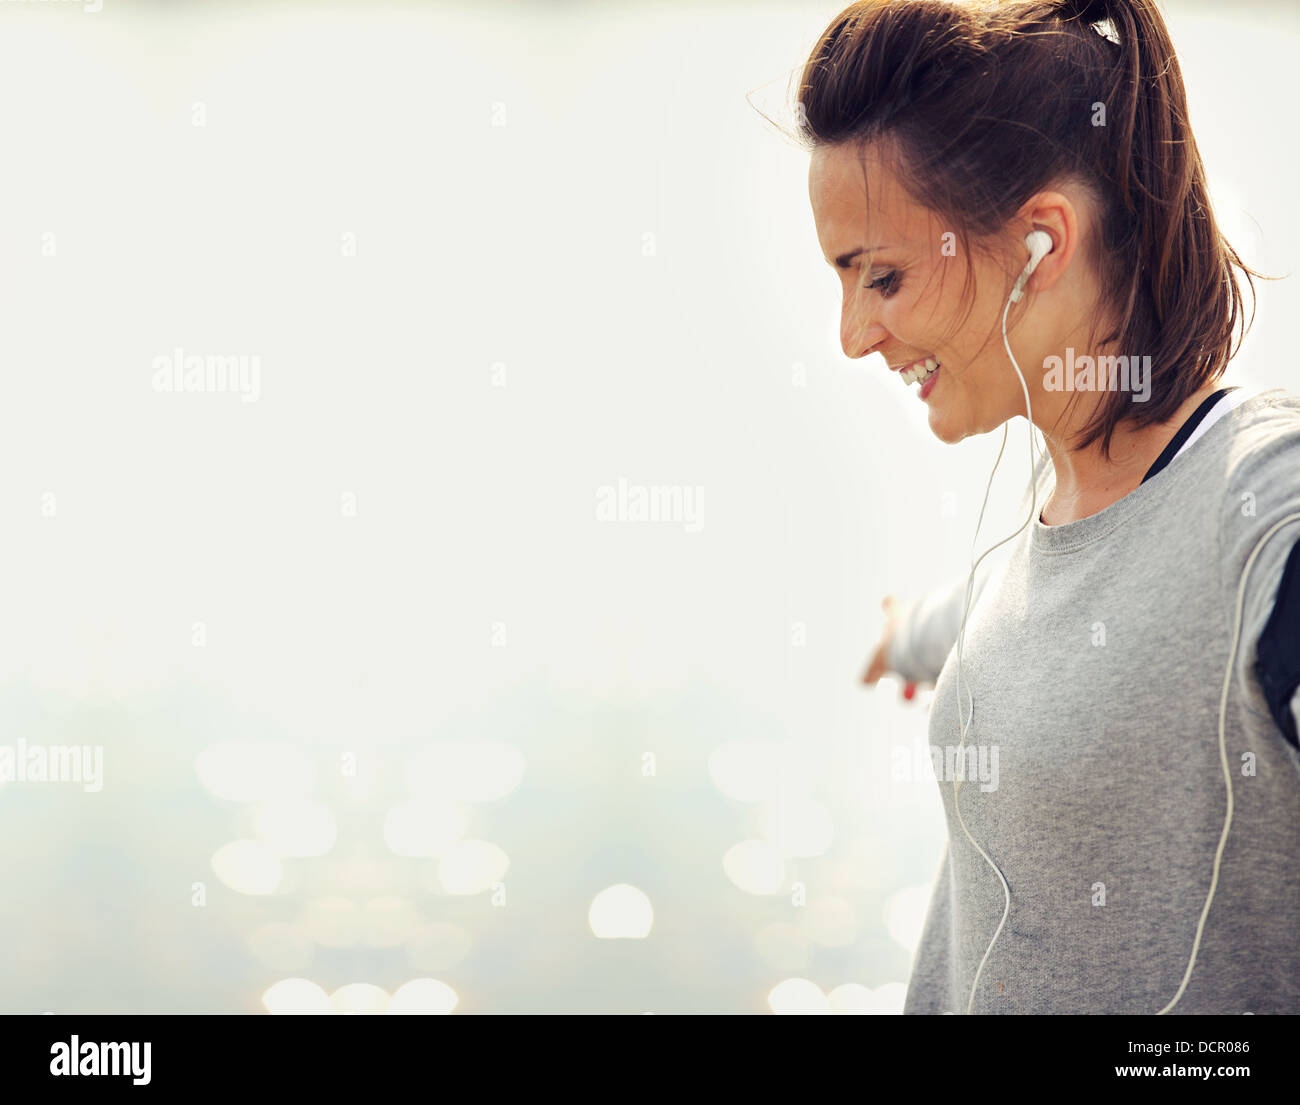 Closeup of a female runner smiling Stock Photo